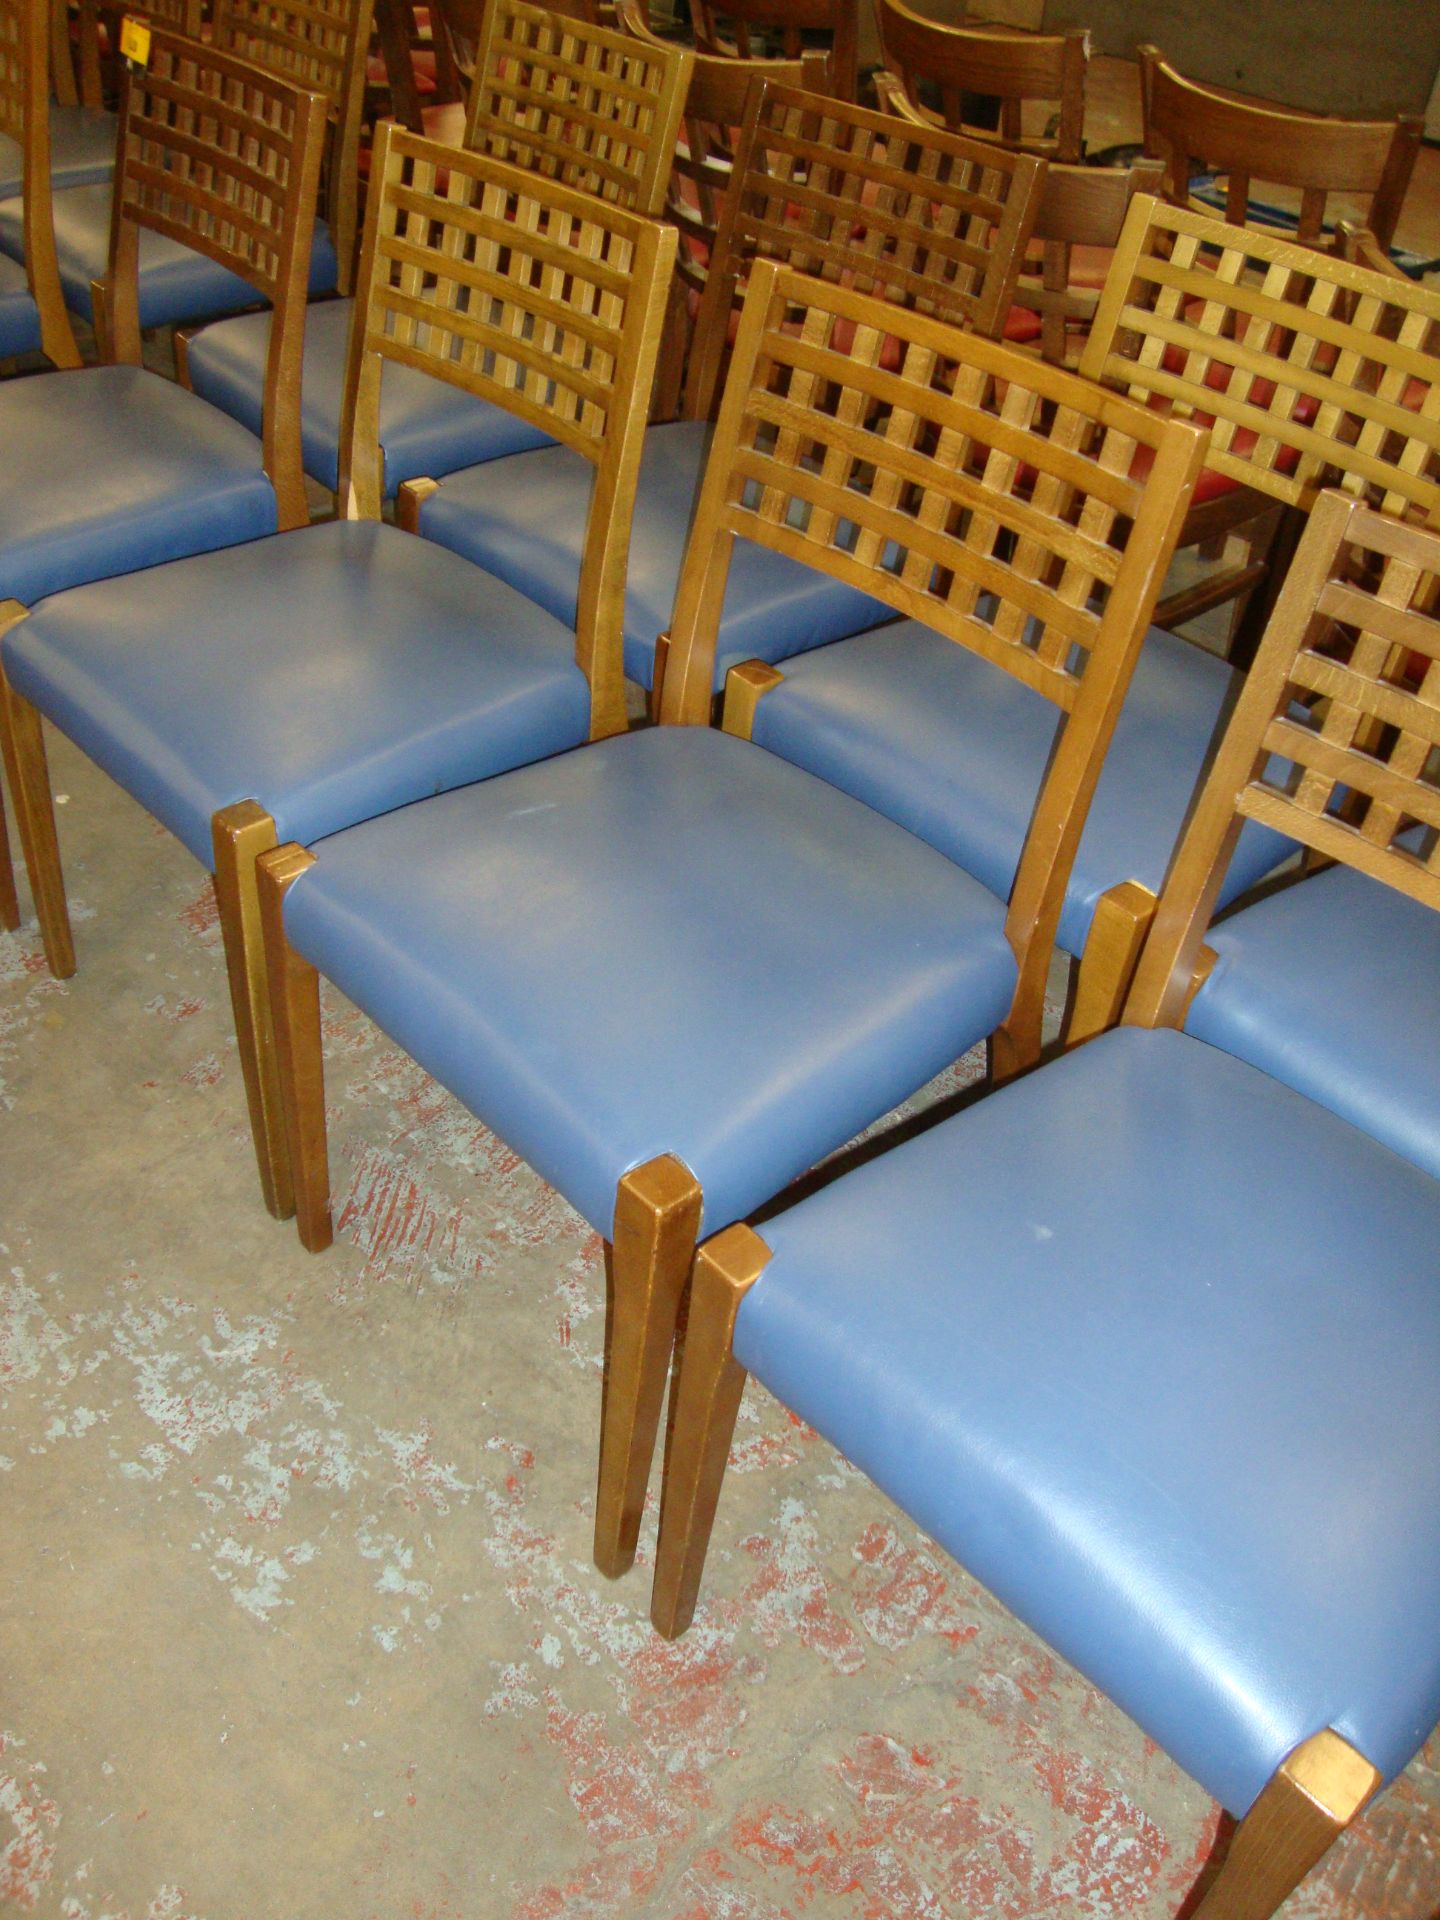 8 off matching wooden chairs with blue upholstered seat bases. NB lots 131 - 137 consist of chairs - Image 3 of 3